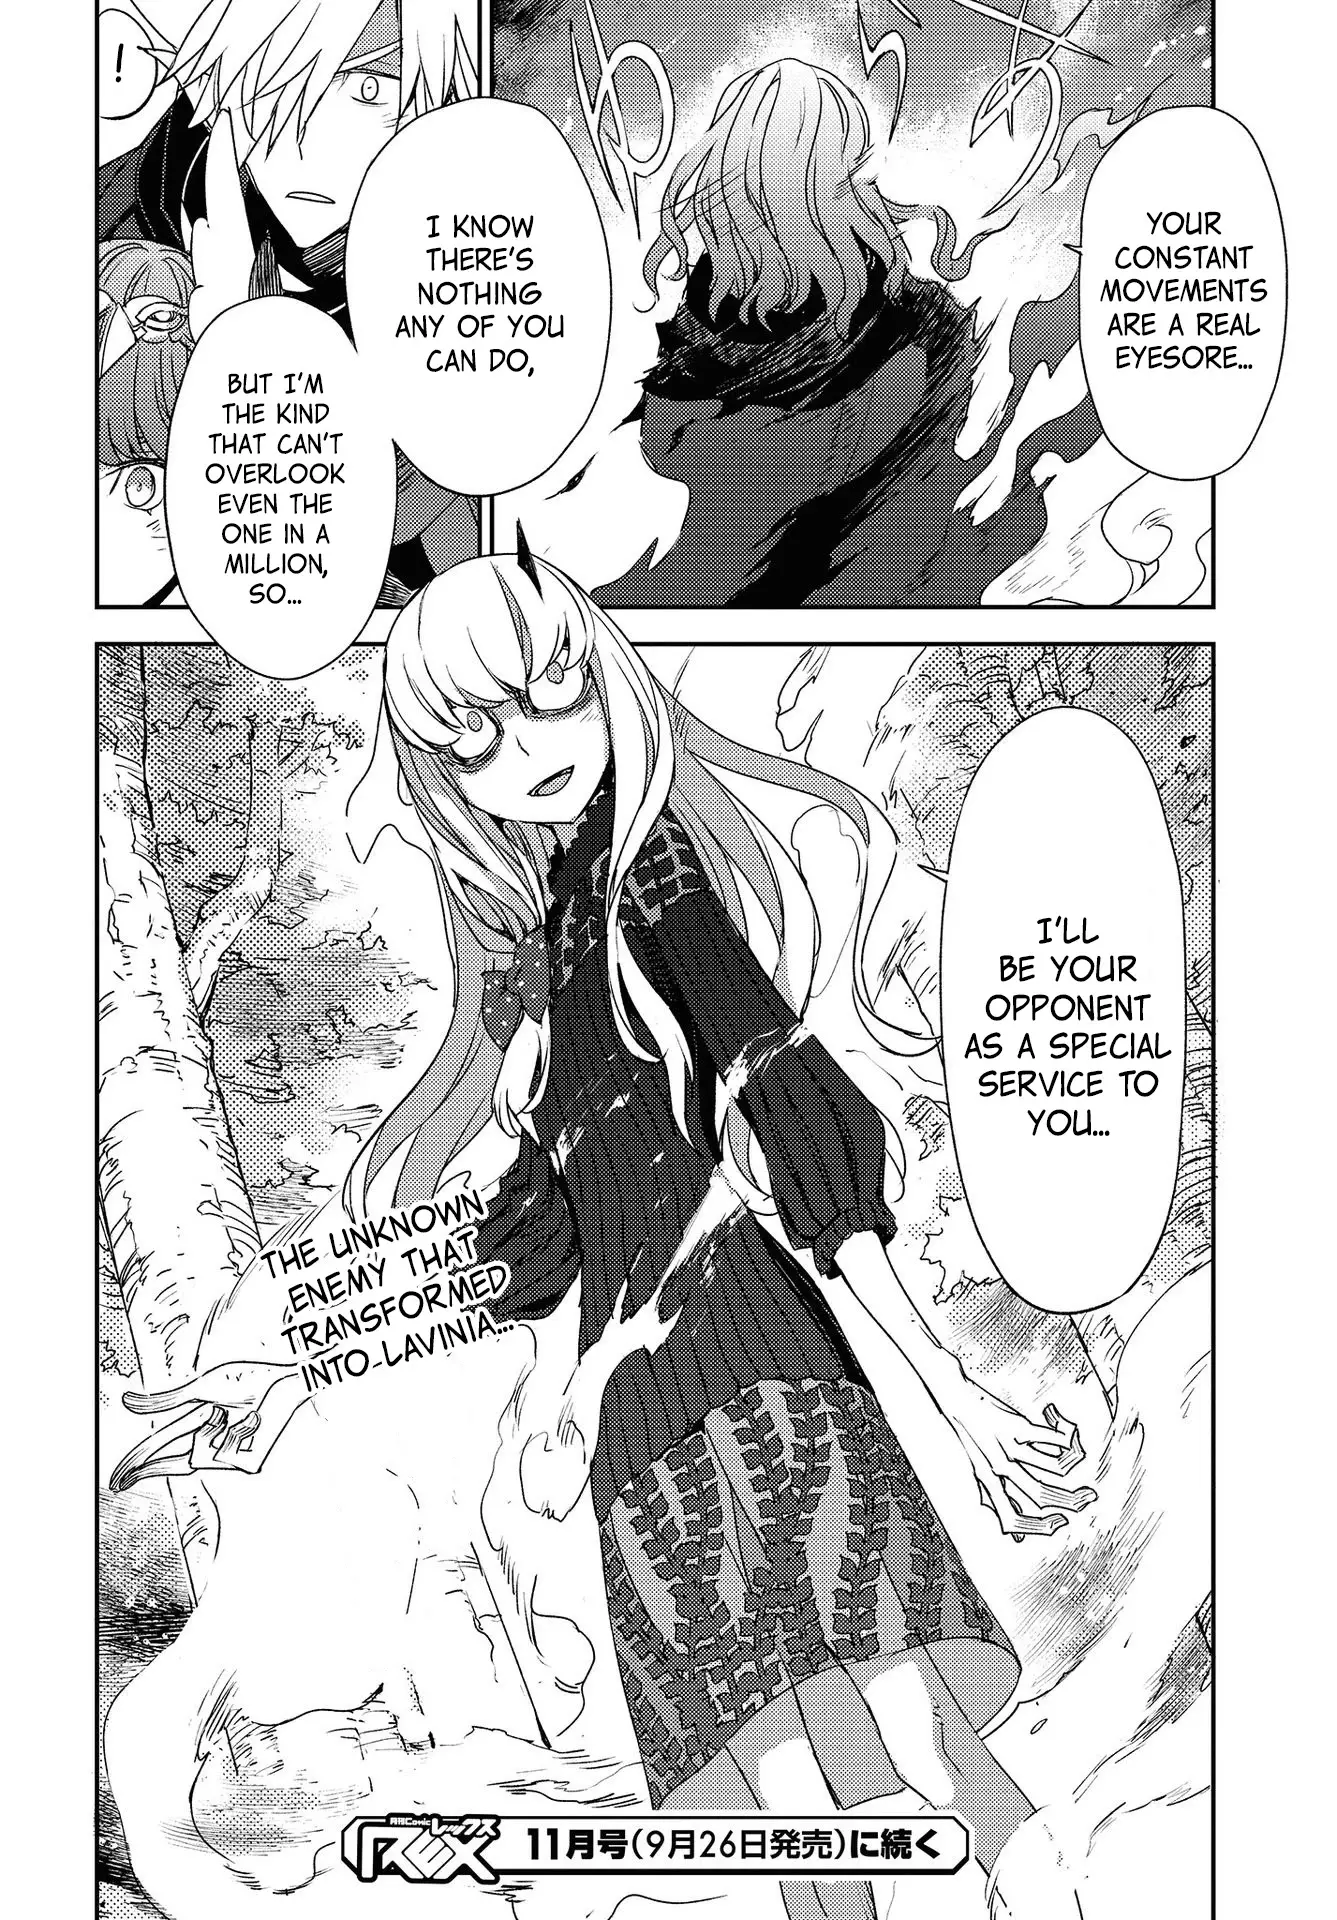 Fate/grand Order: Epic Of Remnant - Subspecies Singularity Iv: Taboo Advent Salem: Salem Of Heresy - 20 page 24-527e1a5c